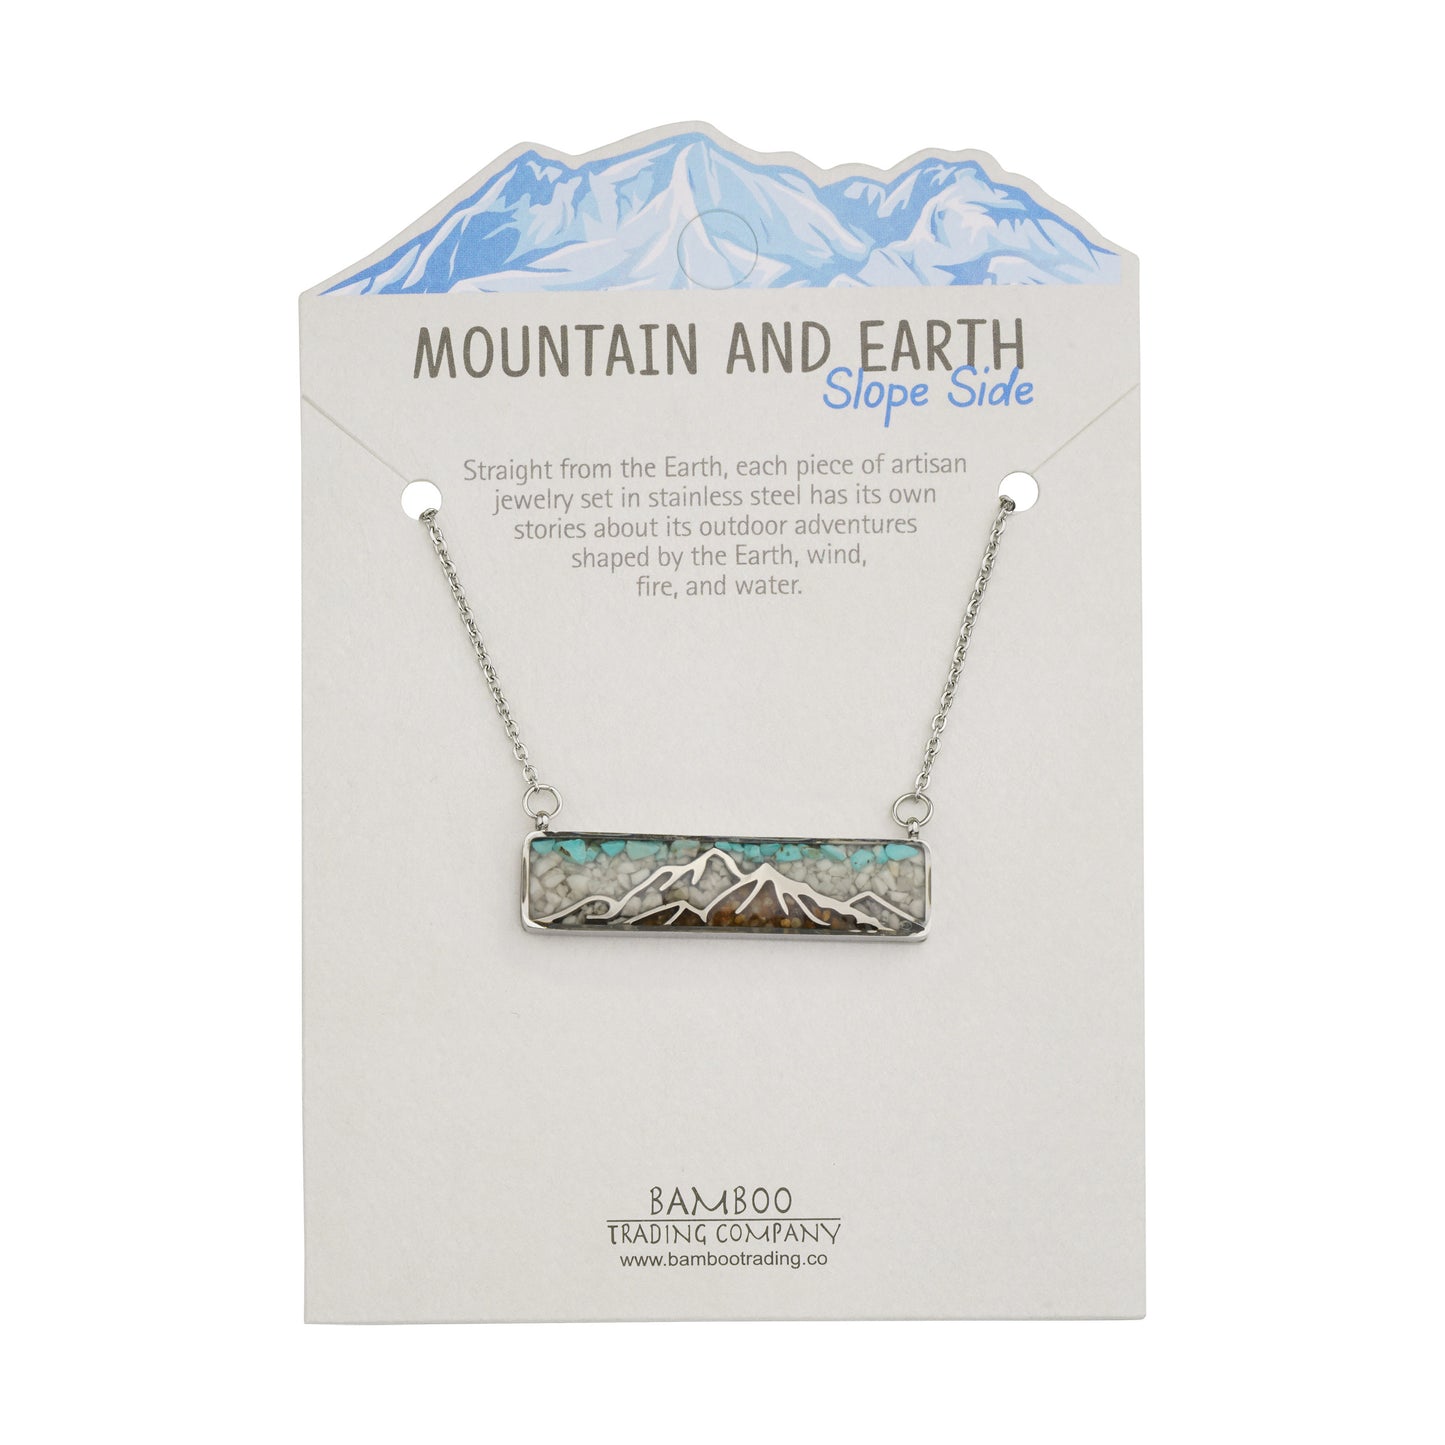 Mountain and Earth Slope Side Necklaces